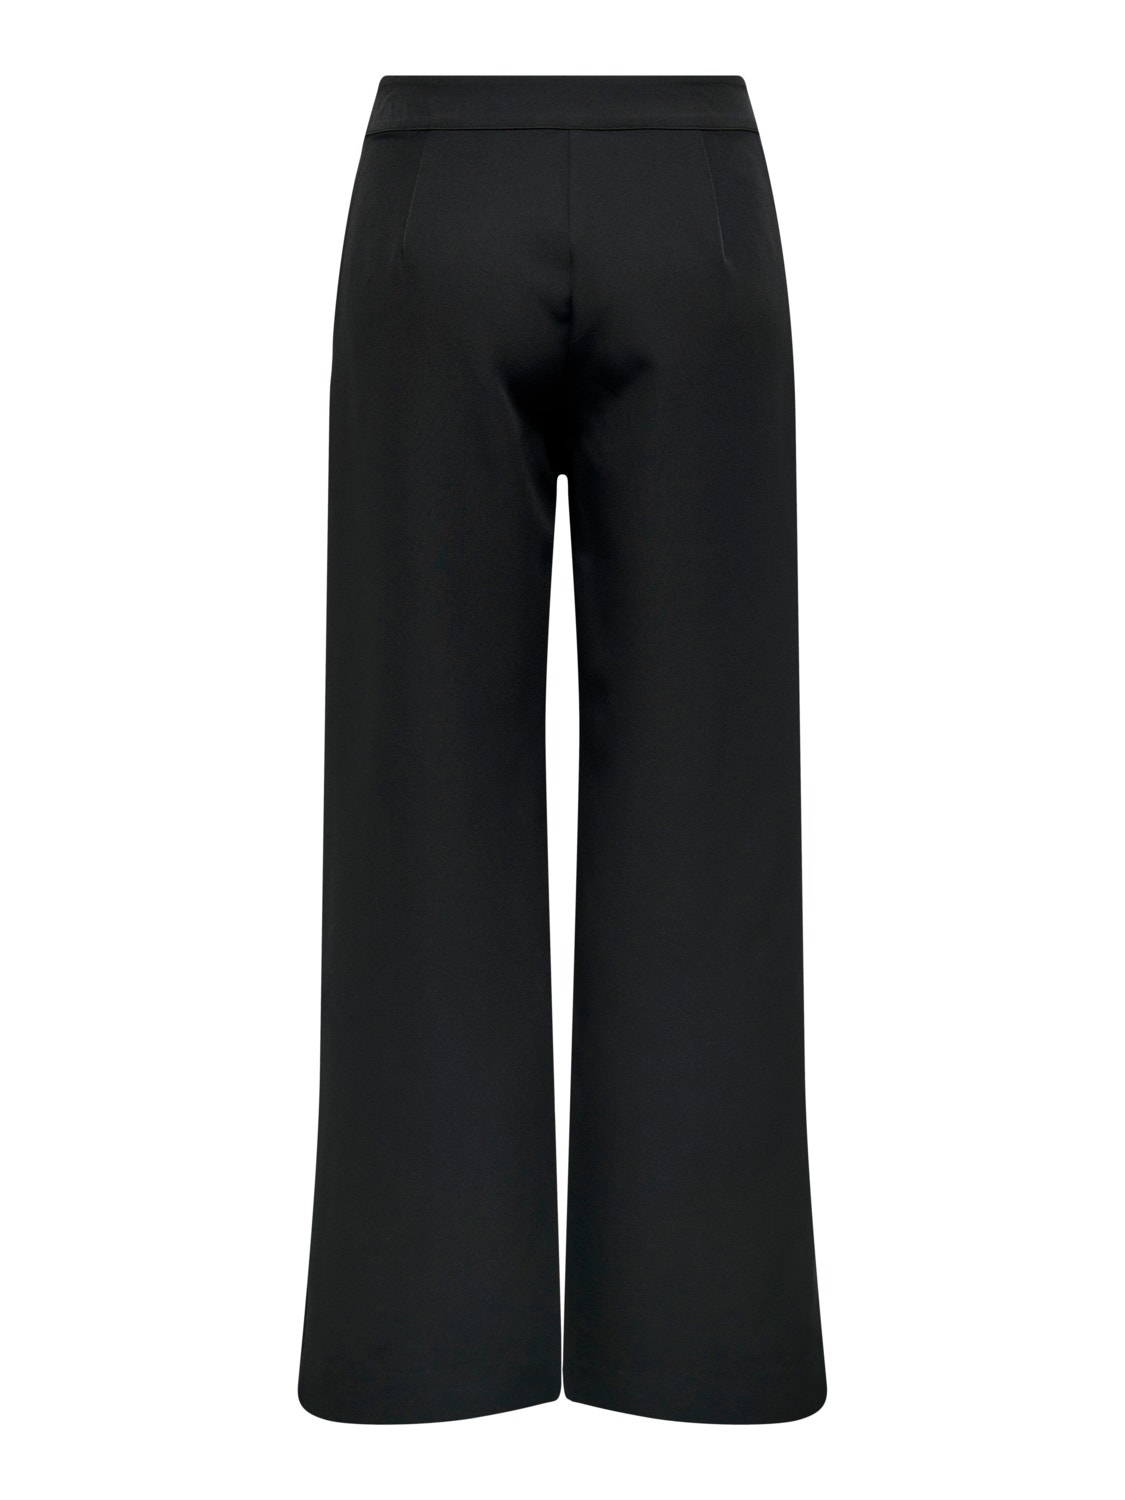 ONLY Wide pants -Black - 15300584